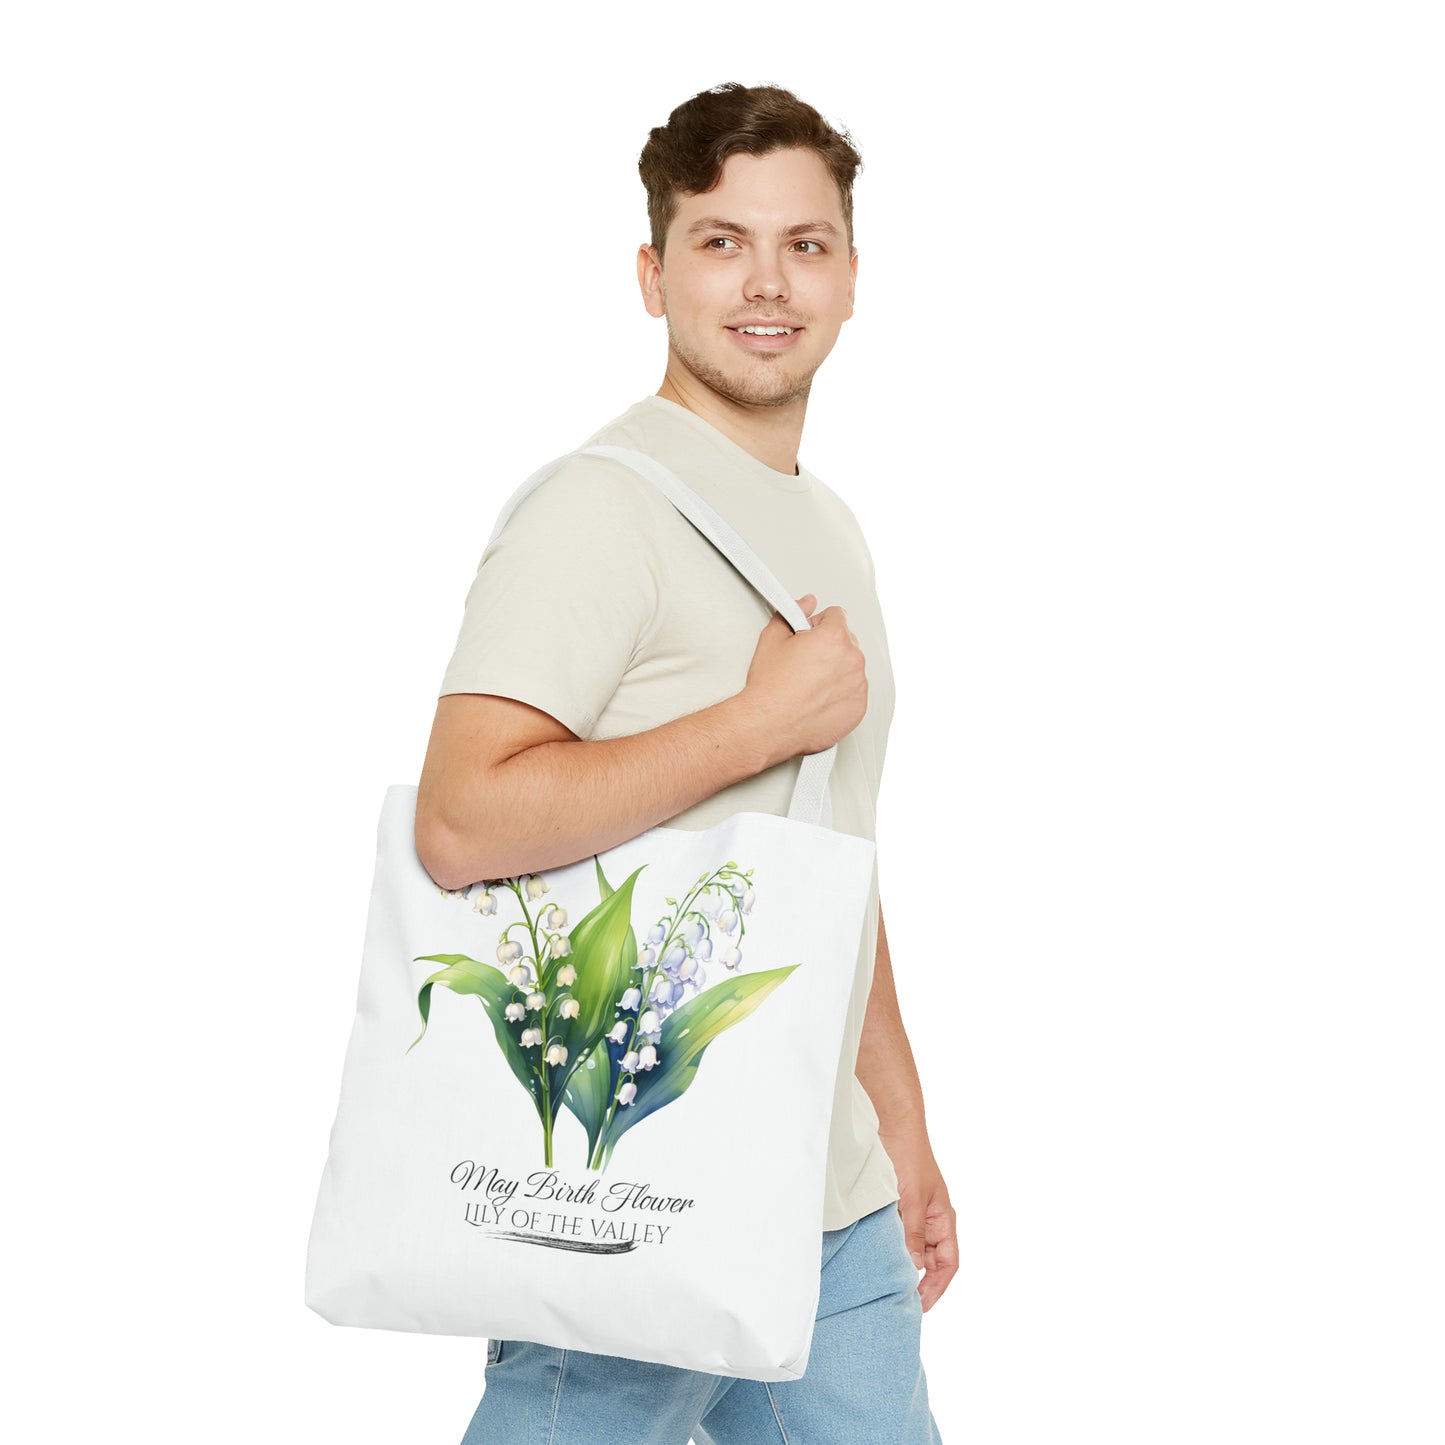 May Birth Flower: Lily of the valley - Tote Bag (AOP)